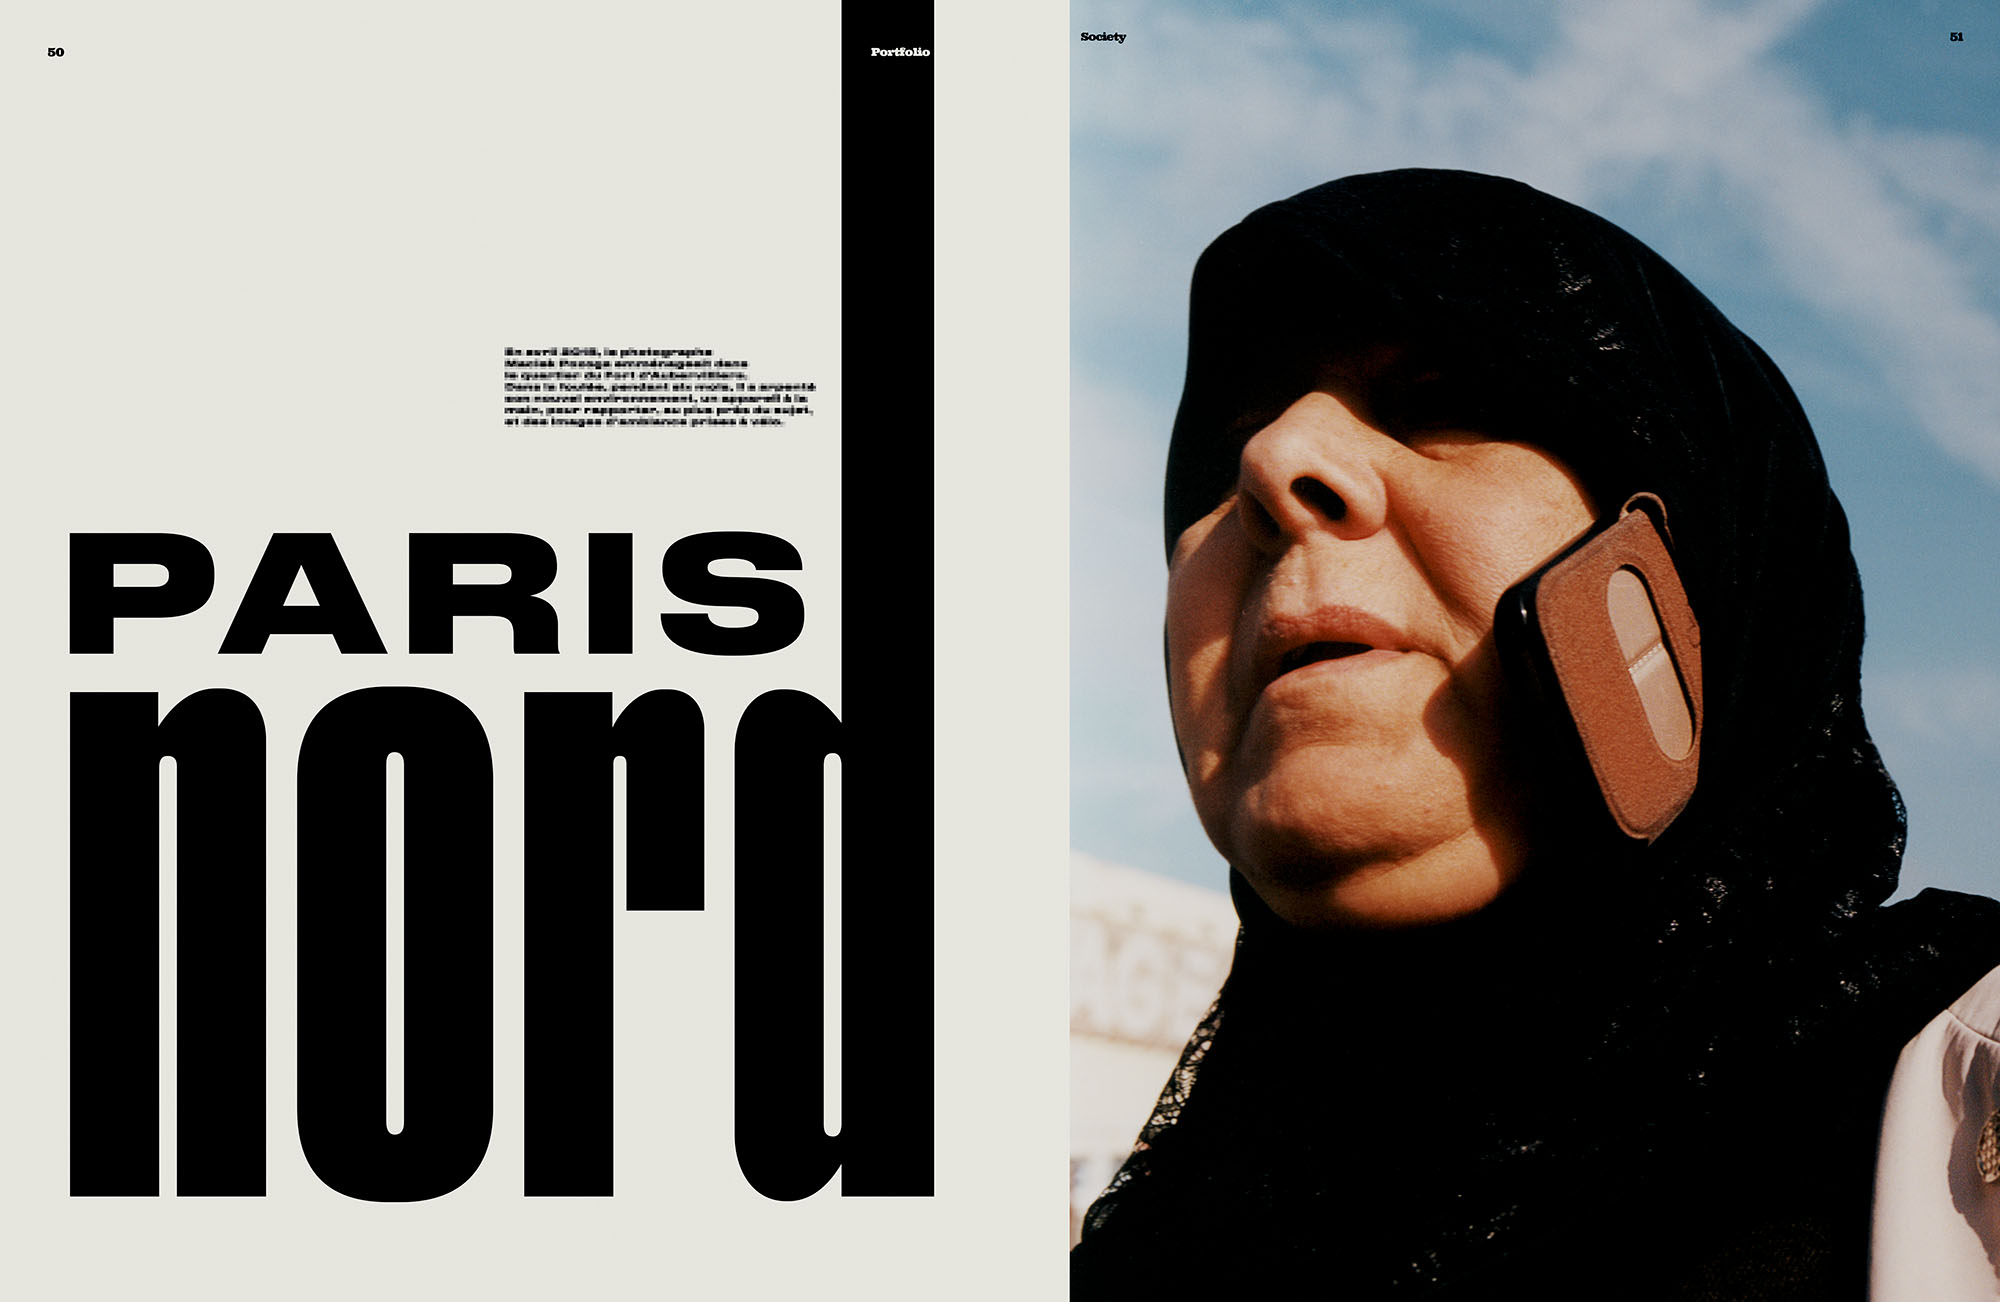 A ten-page portfolio published in *Society magazine*. All images are from my recent project *Paris Nord*. Full project visible in the *Studies* section of this website. - © Maciek Pożoga